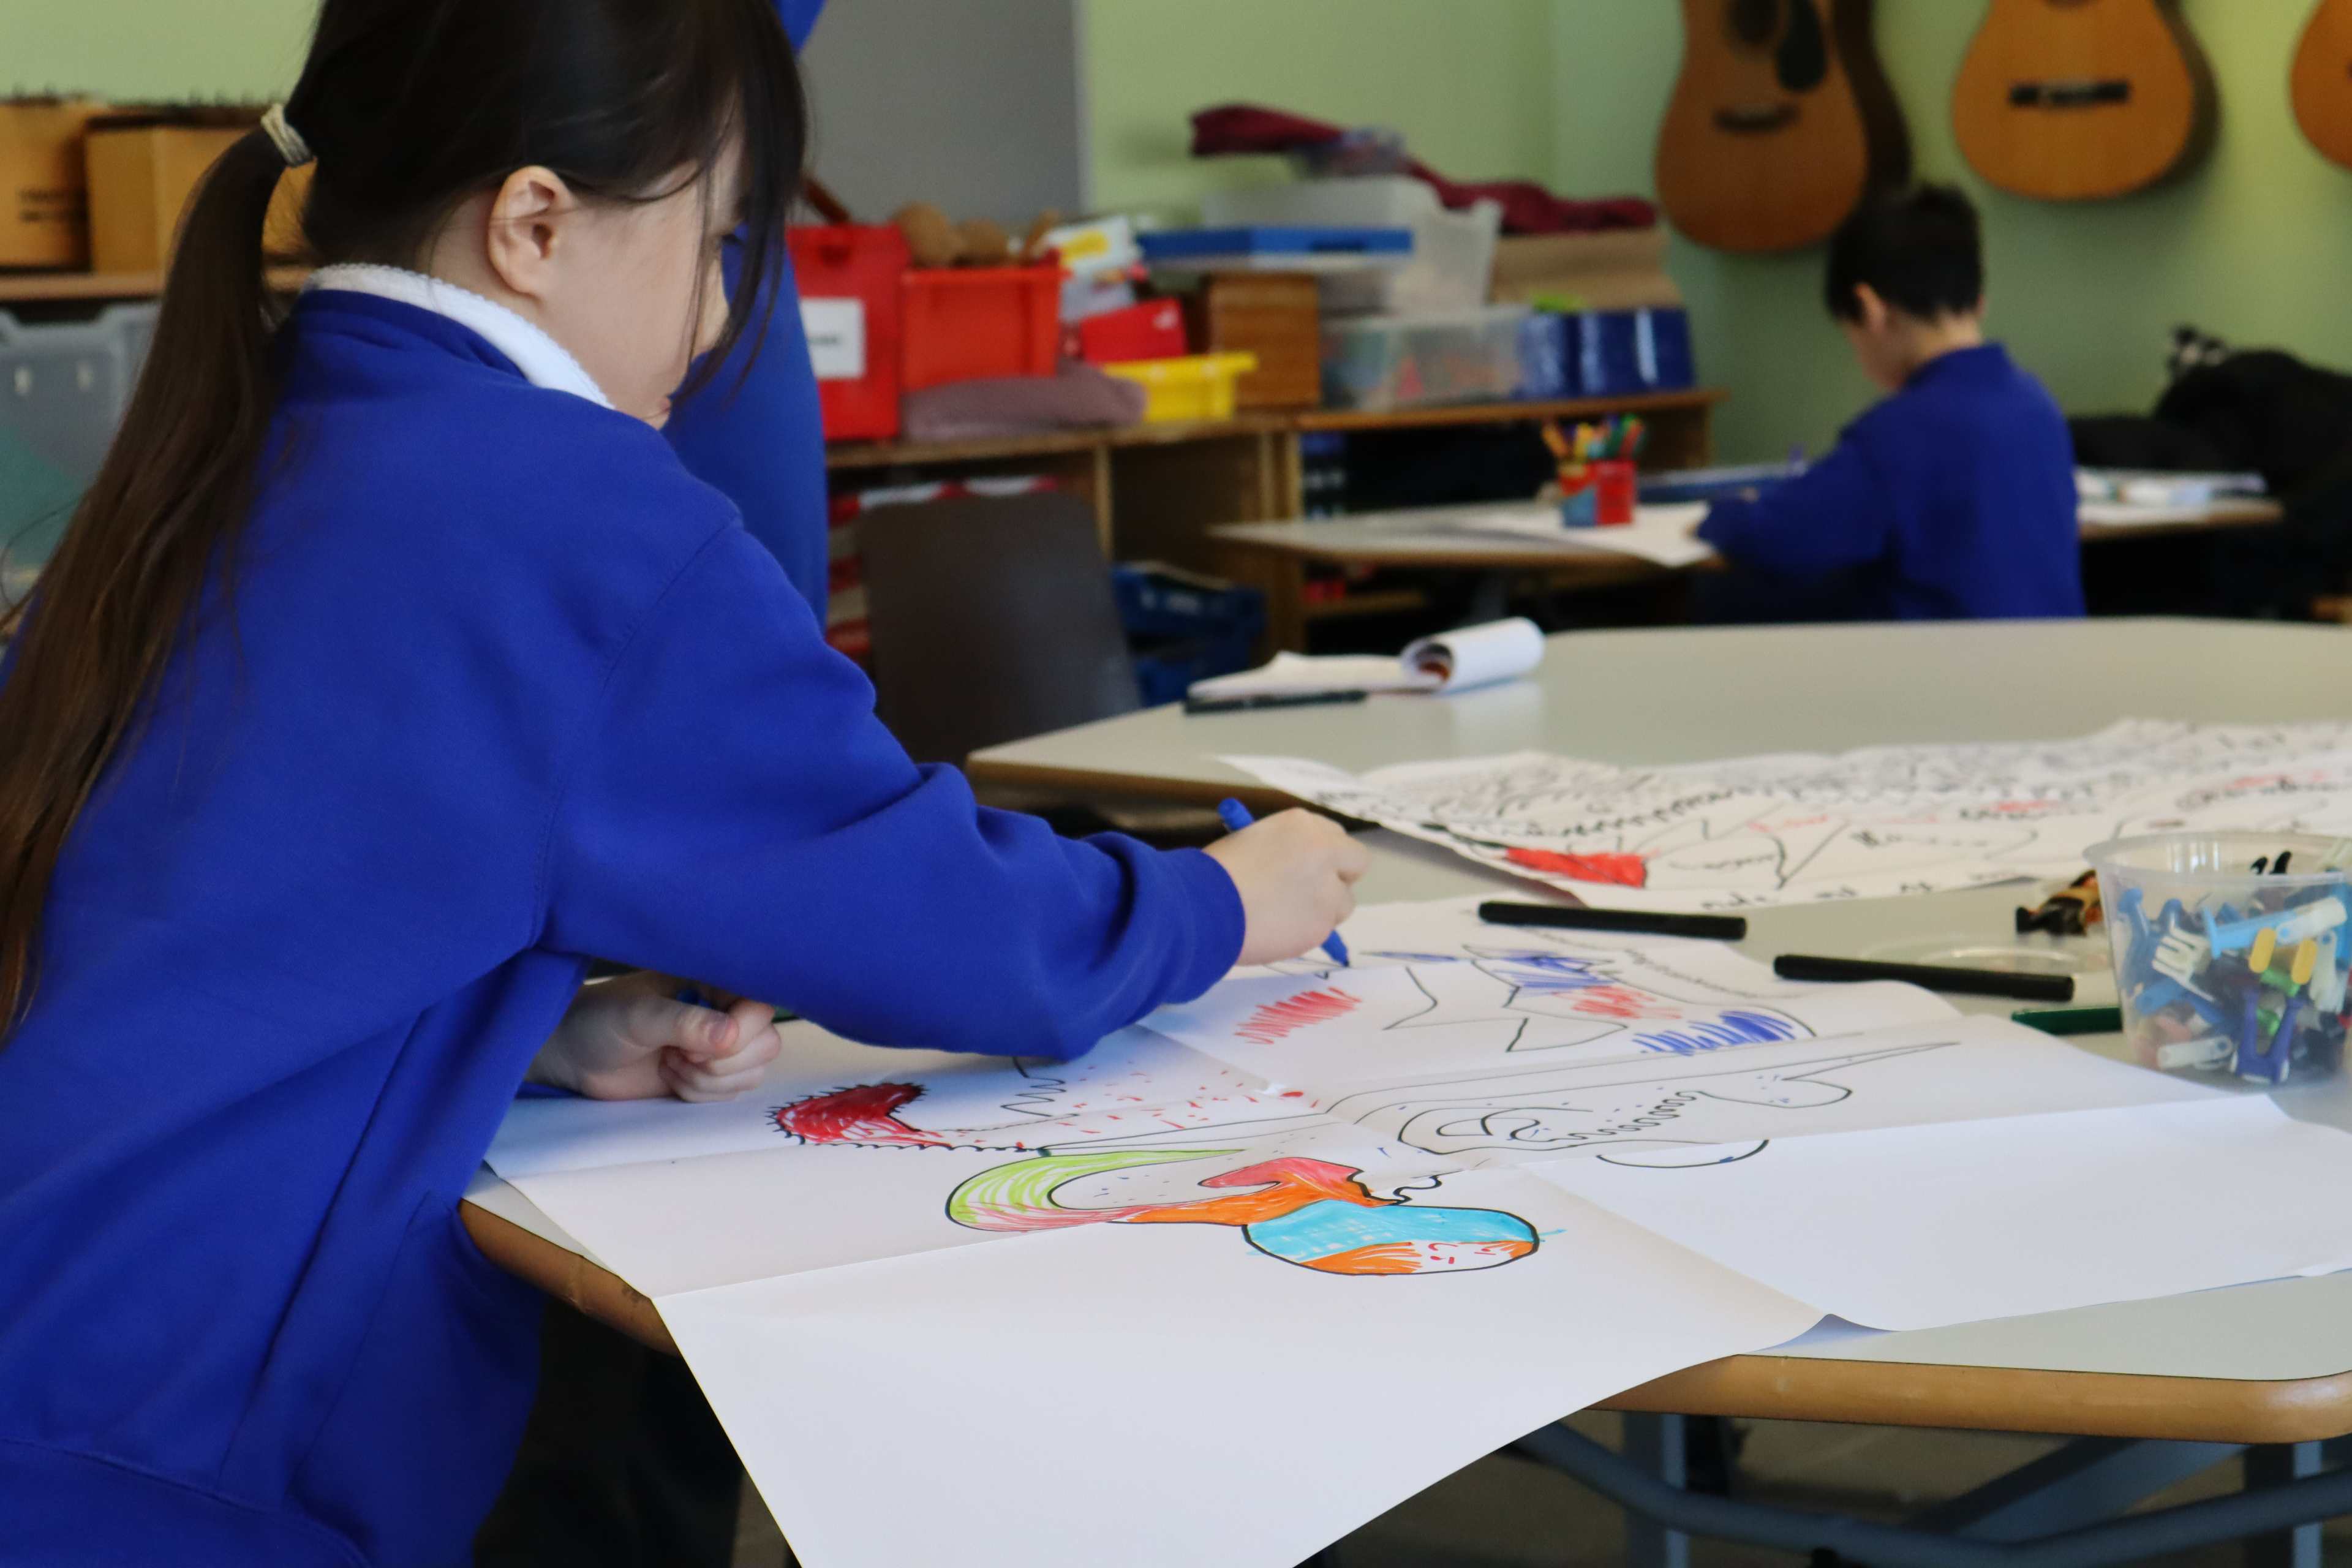 A child wearing a blue sweatshirt sitting at a table colouring in a picture.